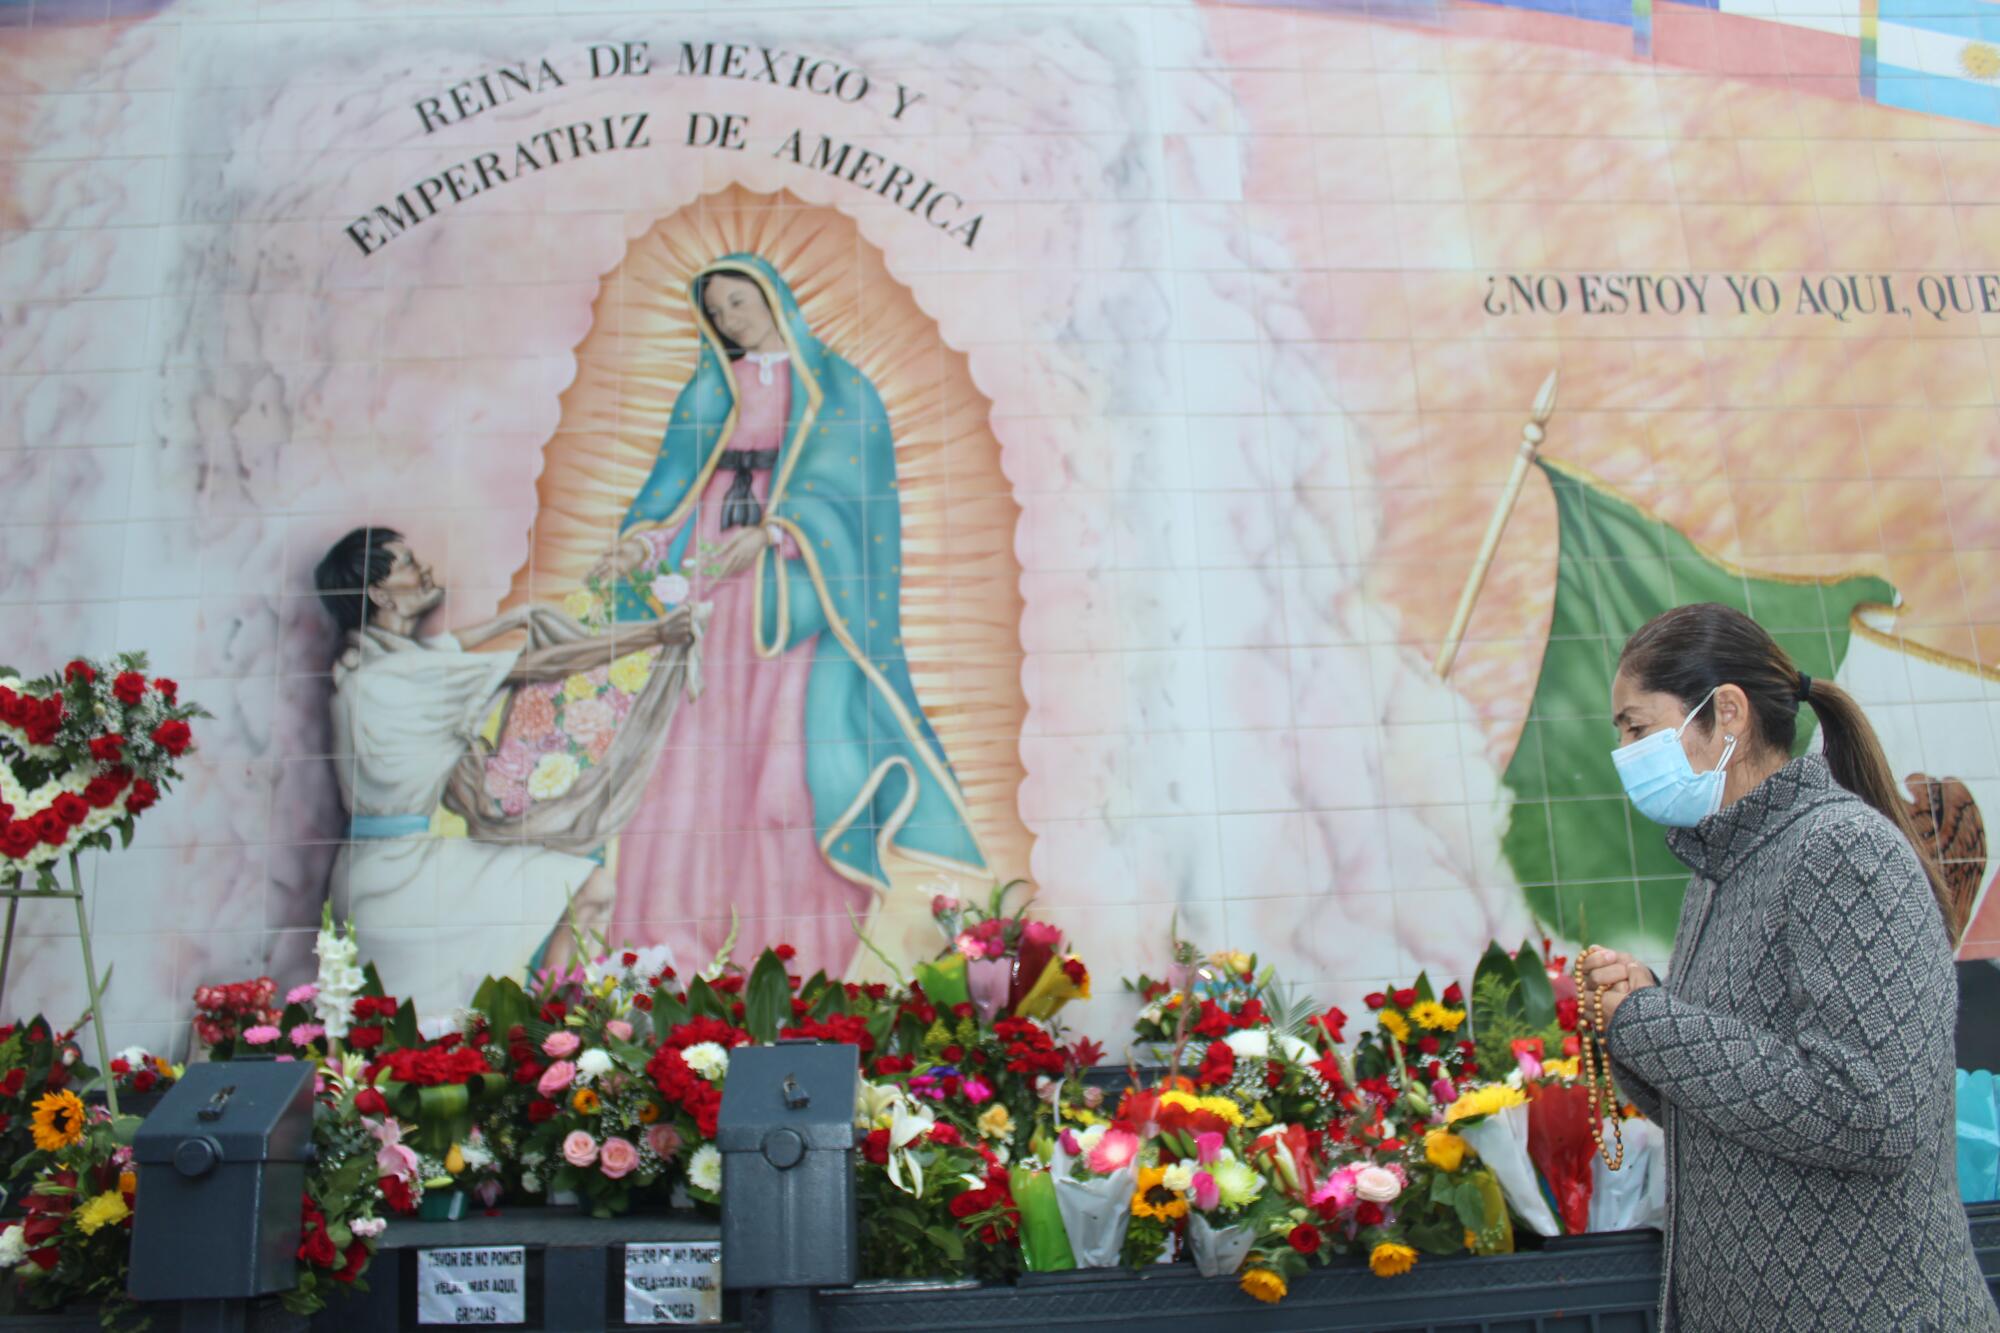 A person stands before flowers and a mural of the Virgen de Guadalupe.